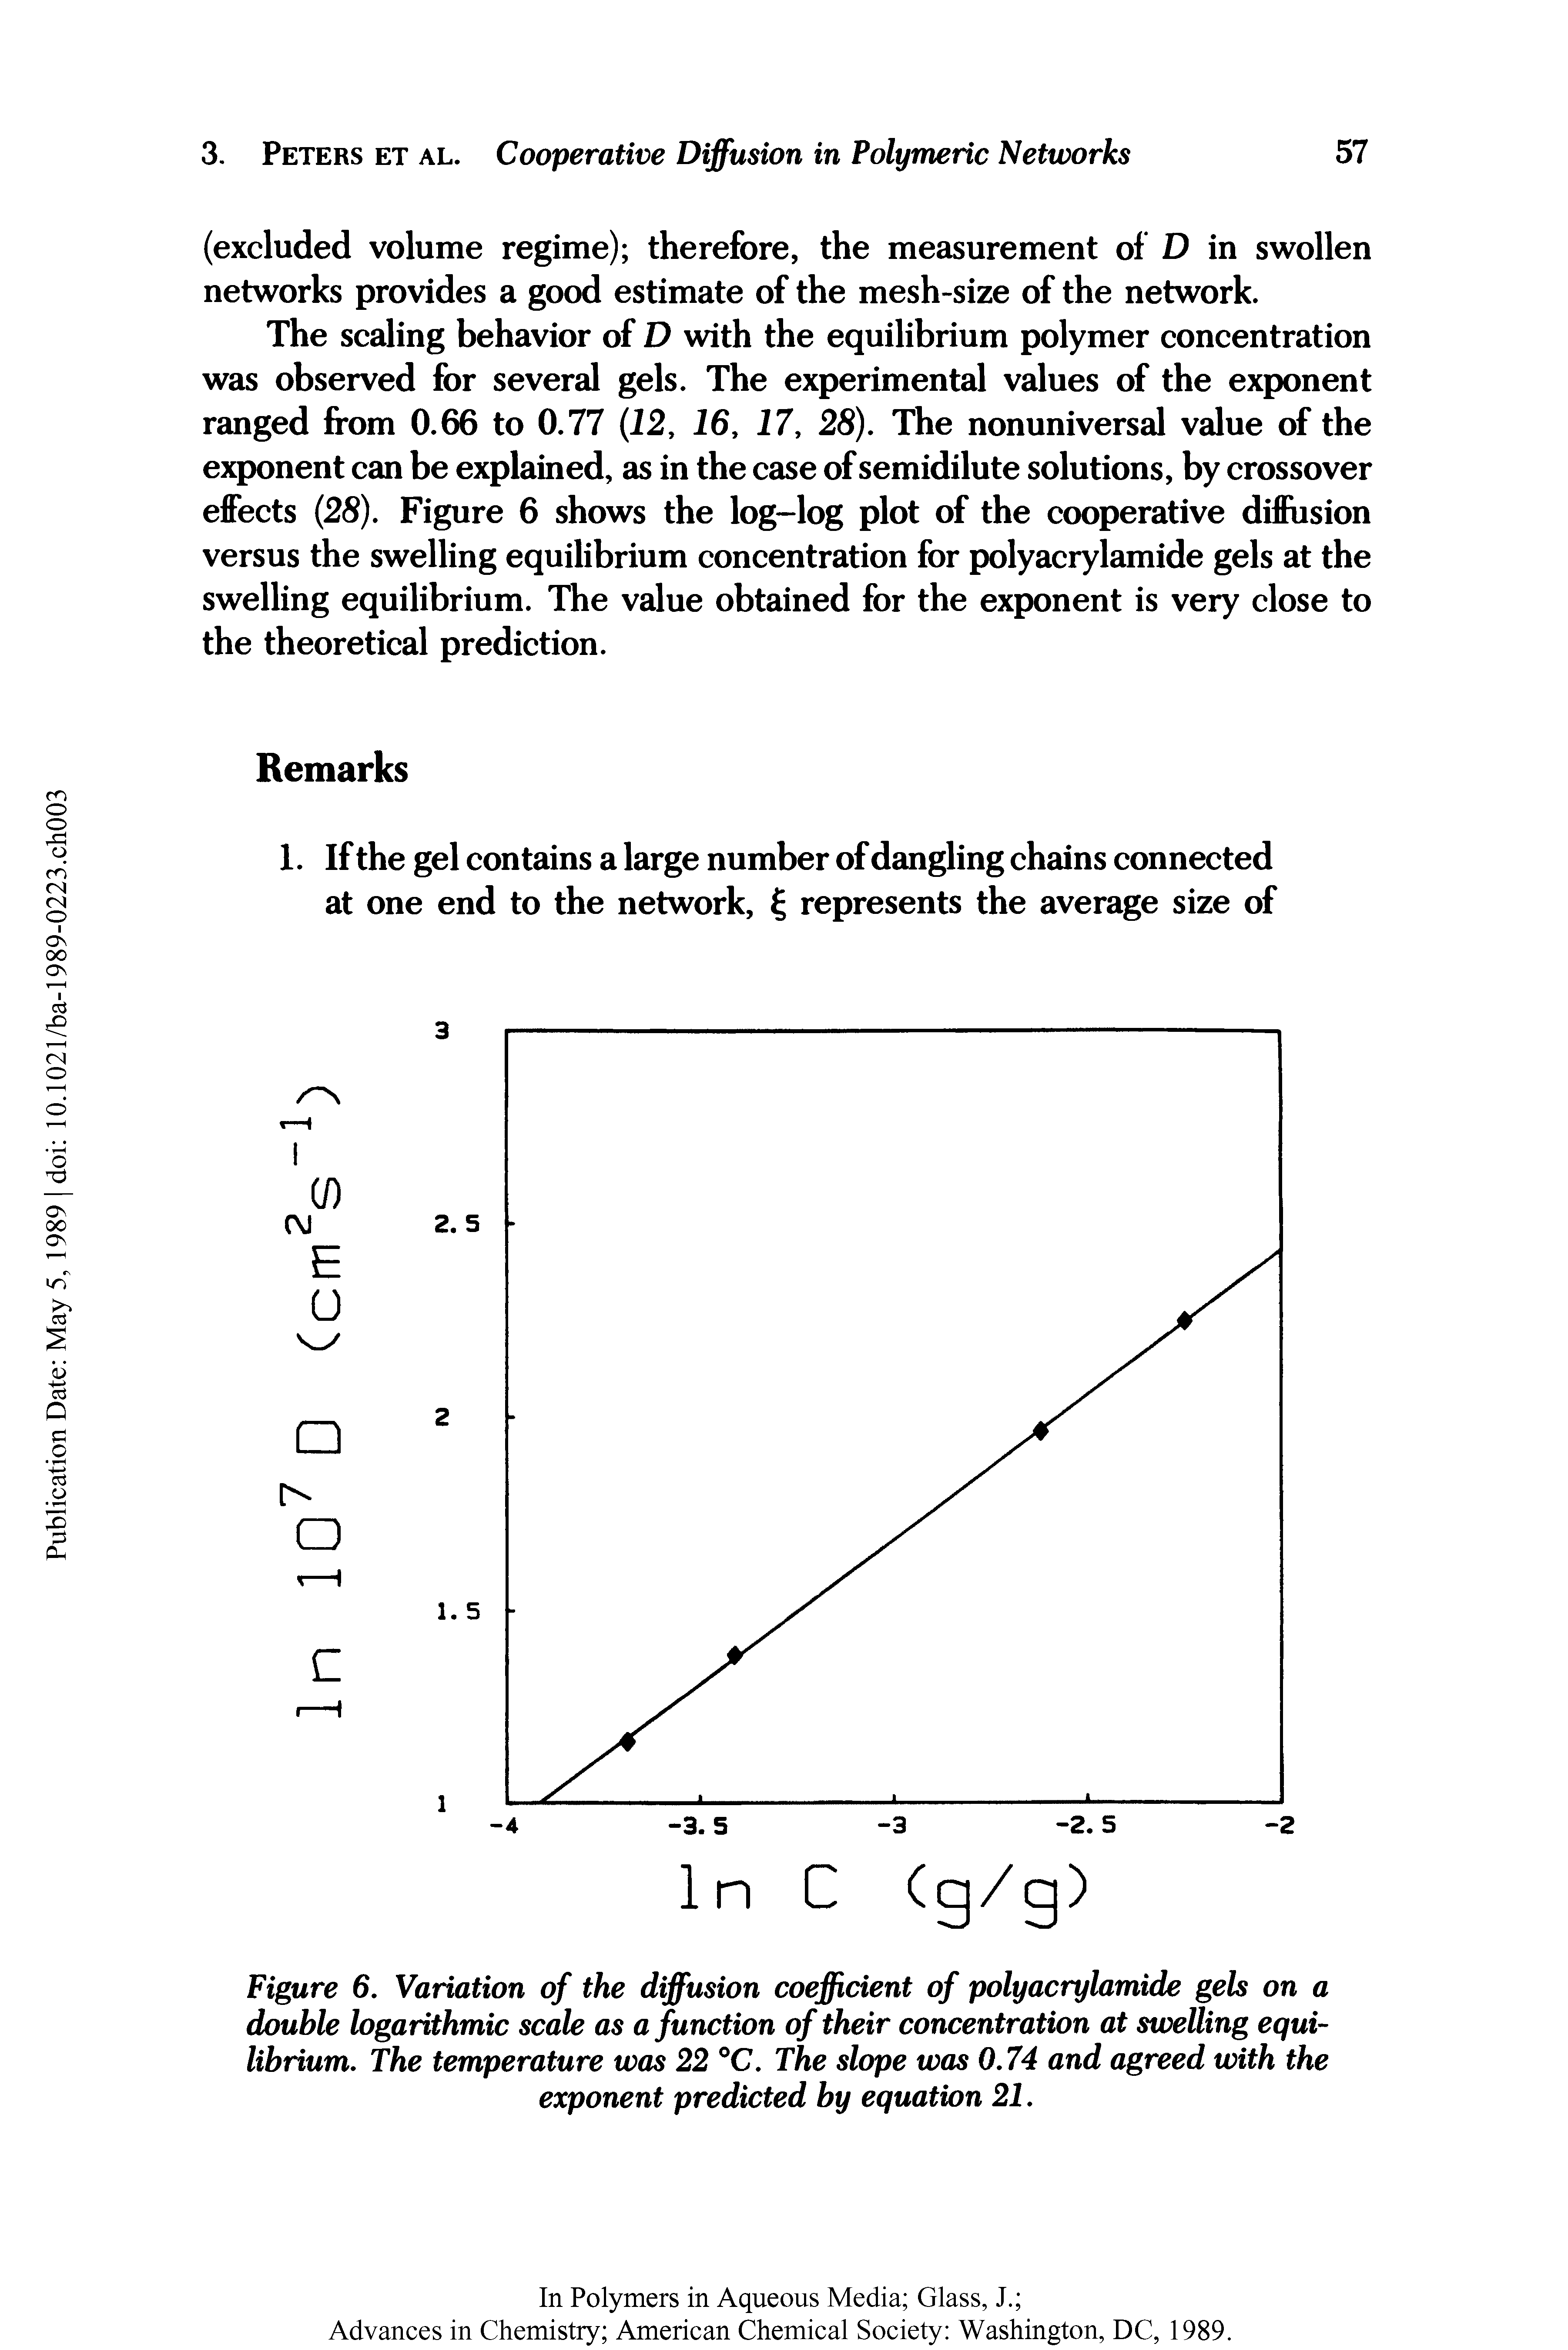 Figure 6. Variation of the diffusion coefficient of polyacrylamide gels on a double logarithmic scale as a function of their concentration at swelling equilibrium. The temperature was 22 C. The slope was 0.74 and agreed with the exponent predicted by equation 21.